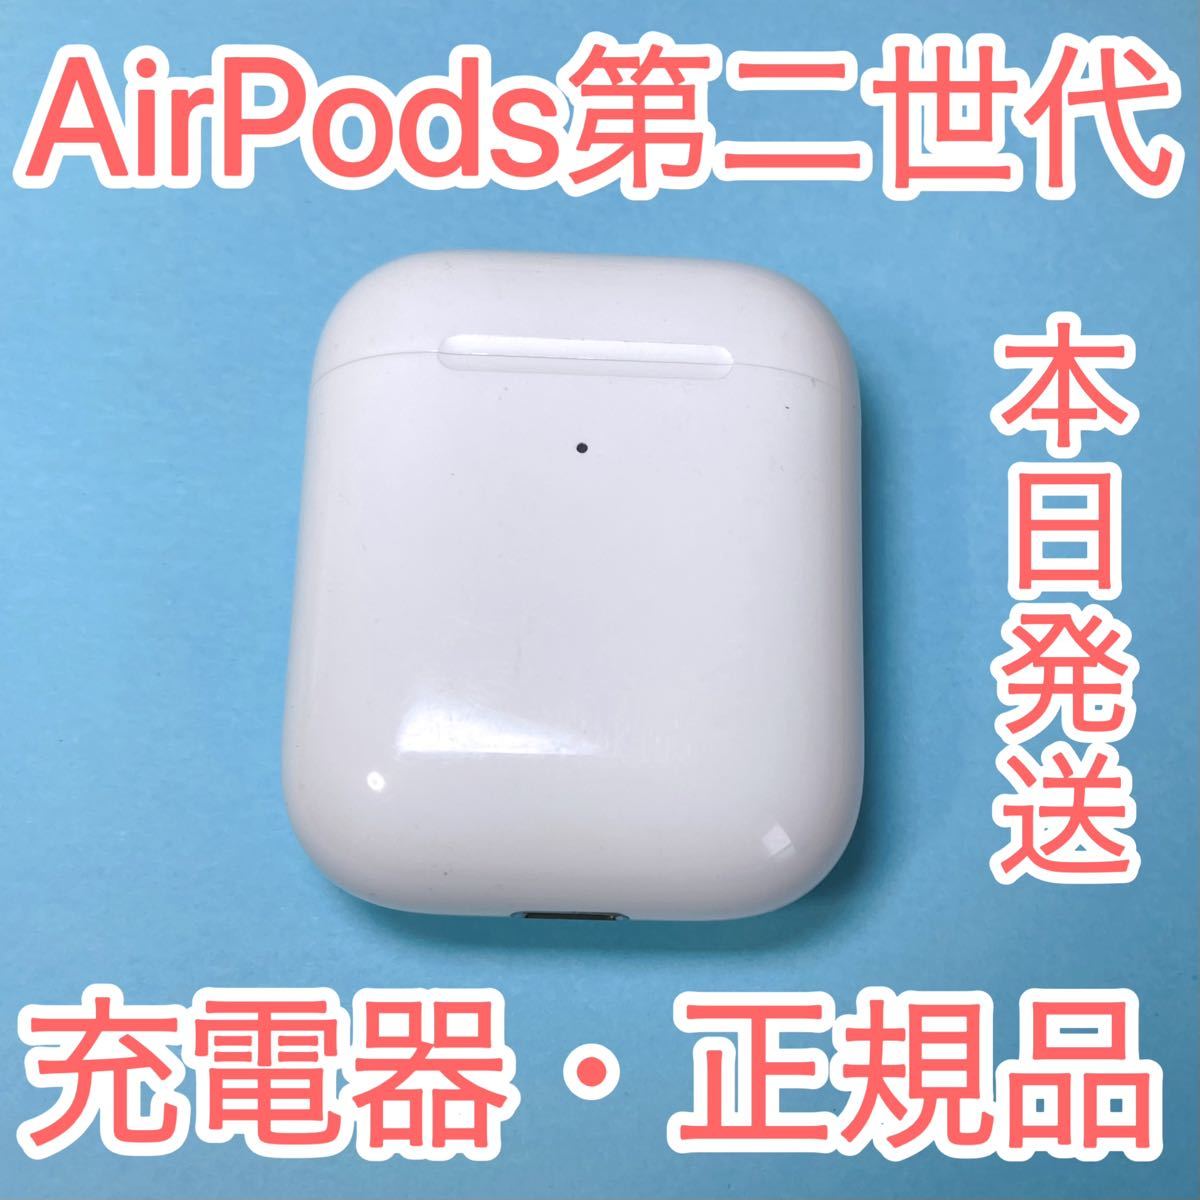 PayPayフリマ｜AirPods pro 充電器 純正品充電ケース エアーポッズ国内 